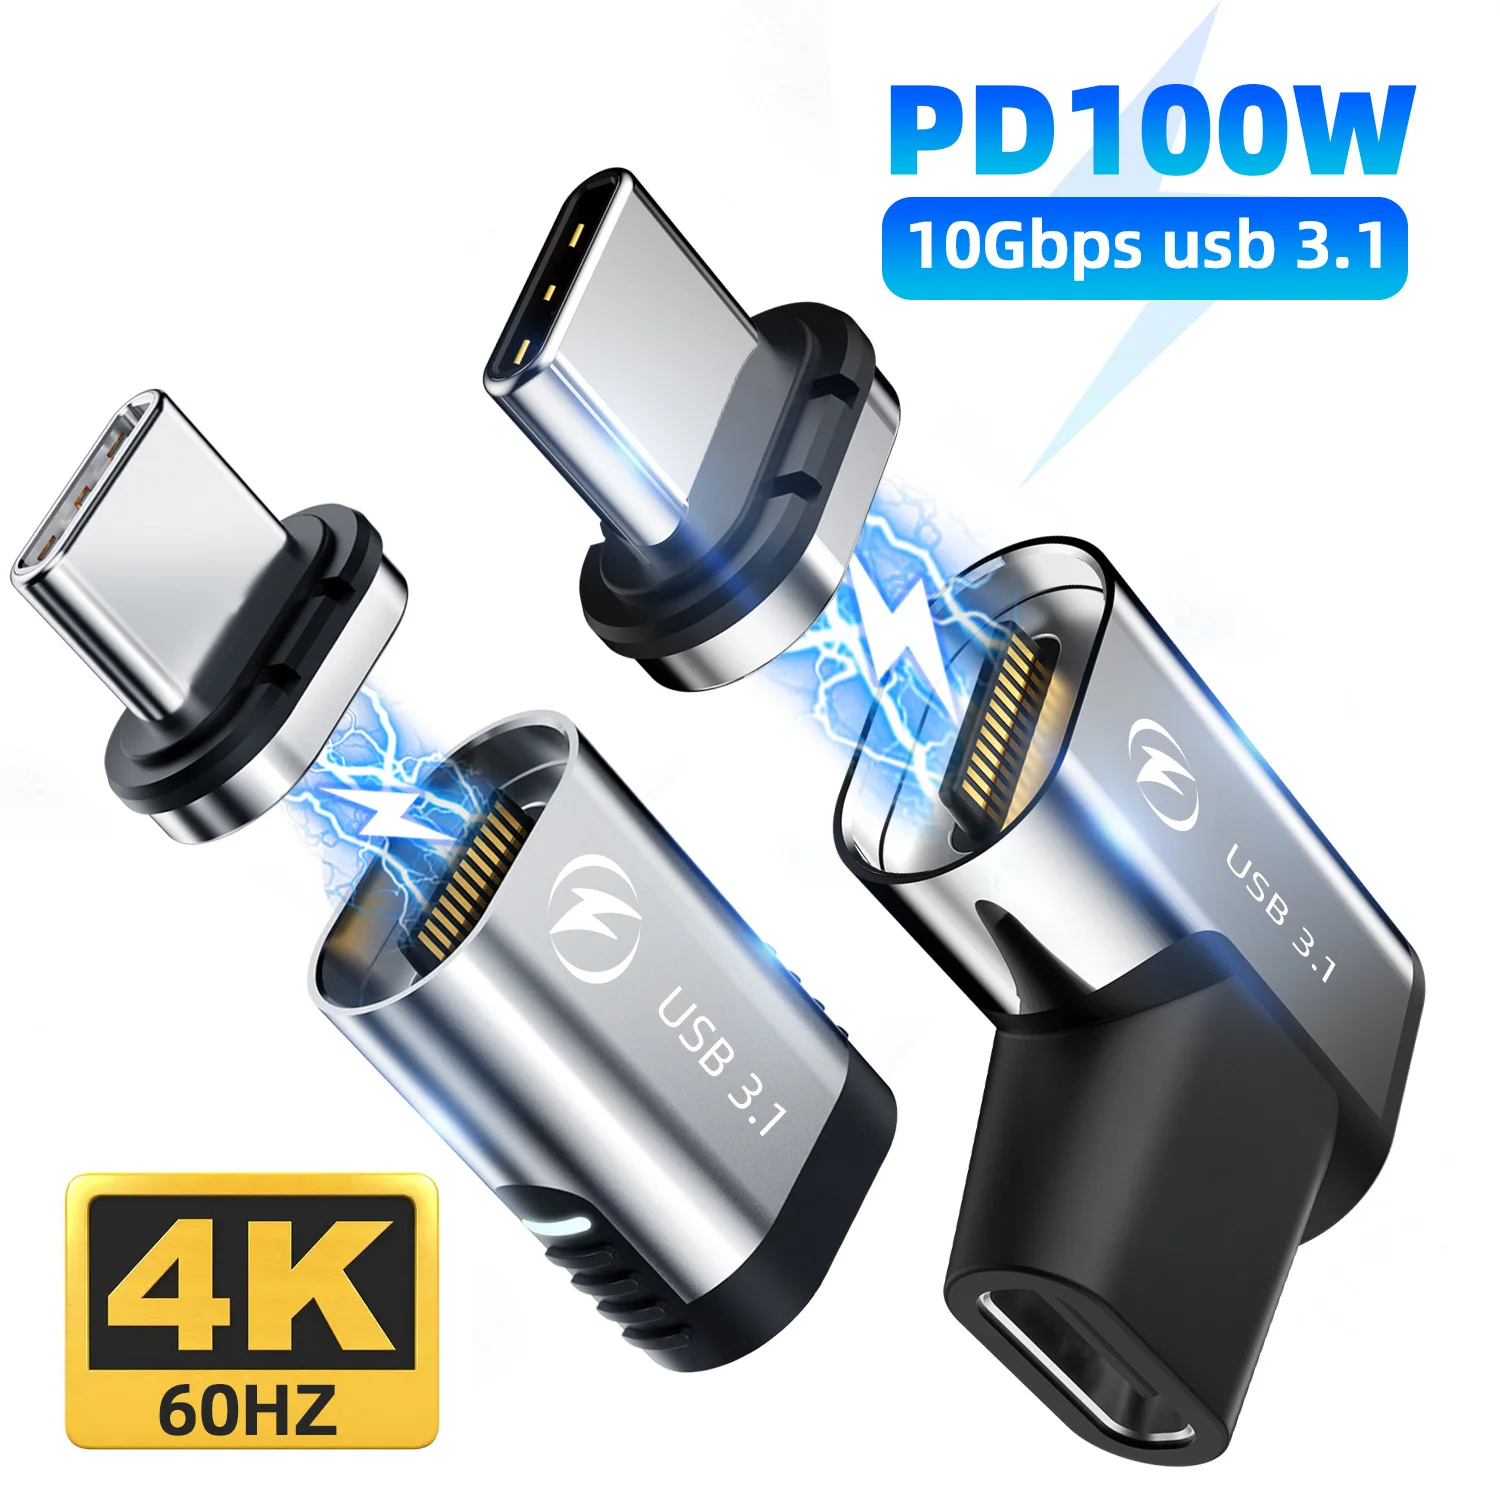 

ANMONE Usb3.1 Magnetic USB C Adapter 10Gbp PD 100W Fast Charging Type C Connector Data Sync 24Pins 4K@60Hz c형 마그네틱 어댑터